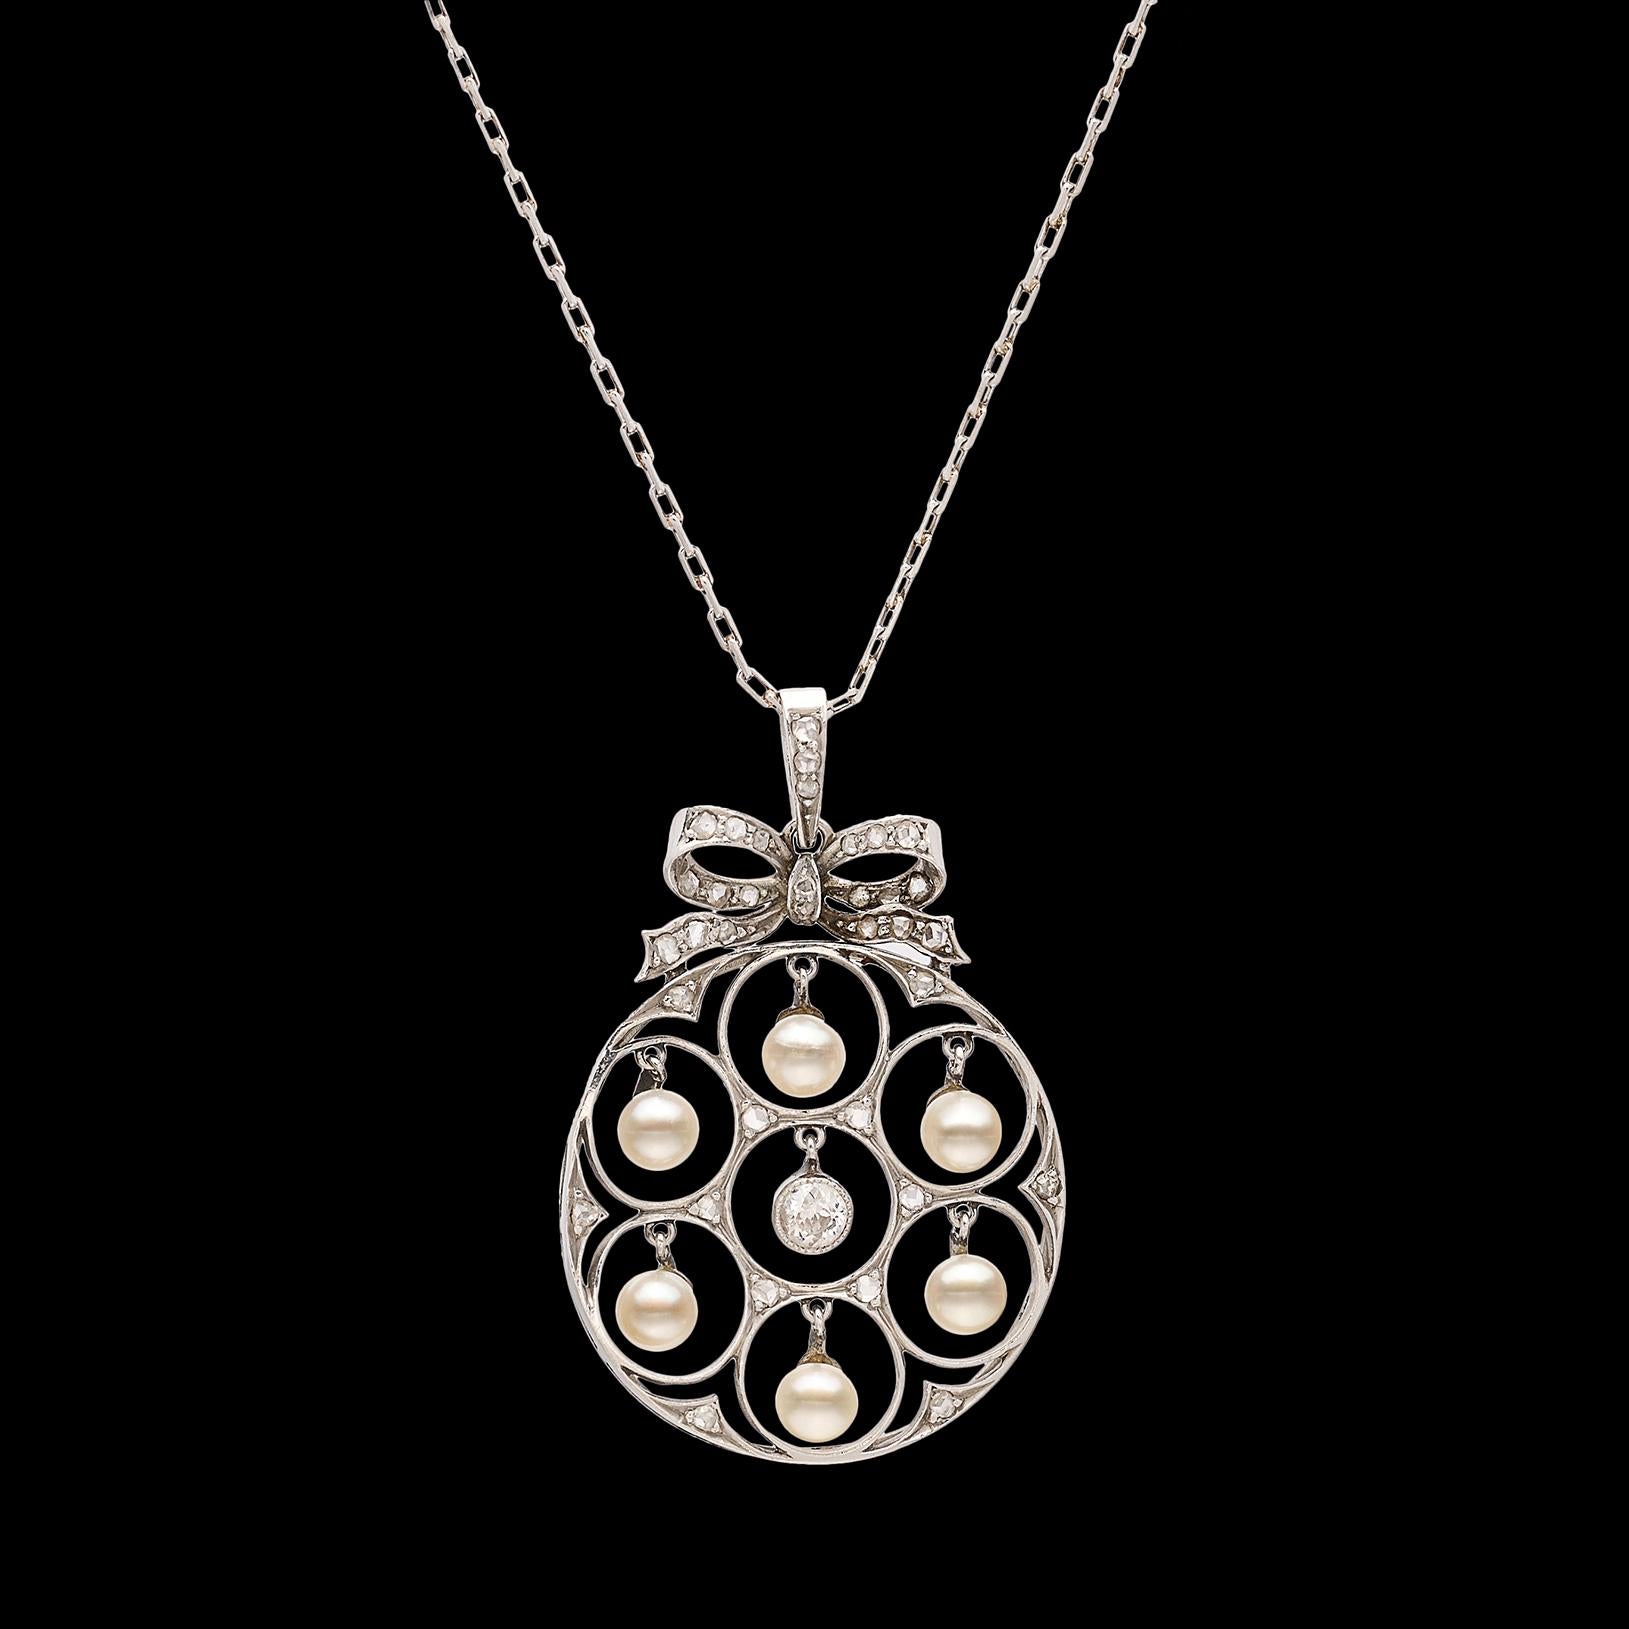 Old European Cut Edwardian Diamond and Pearl Pendant Necklace